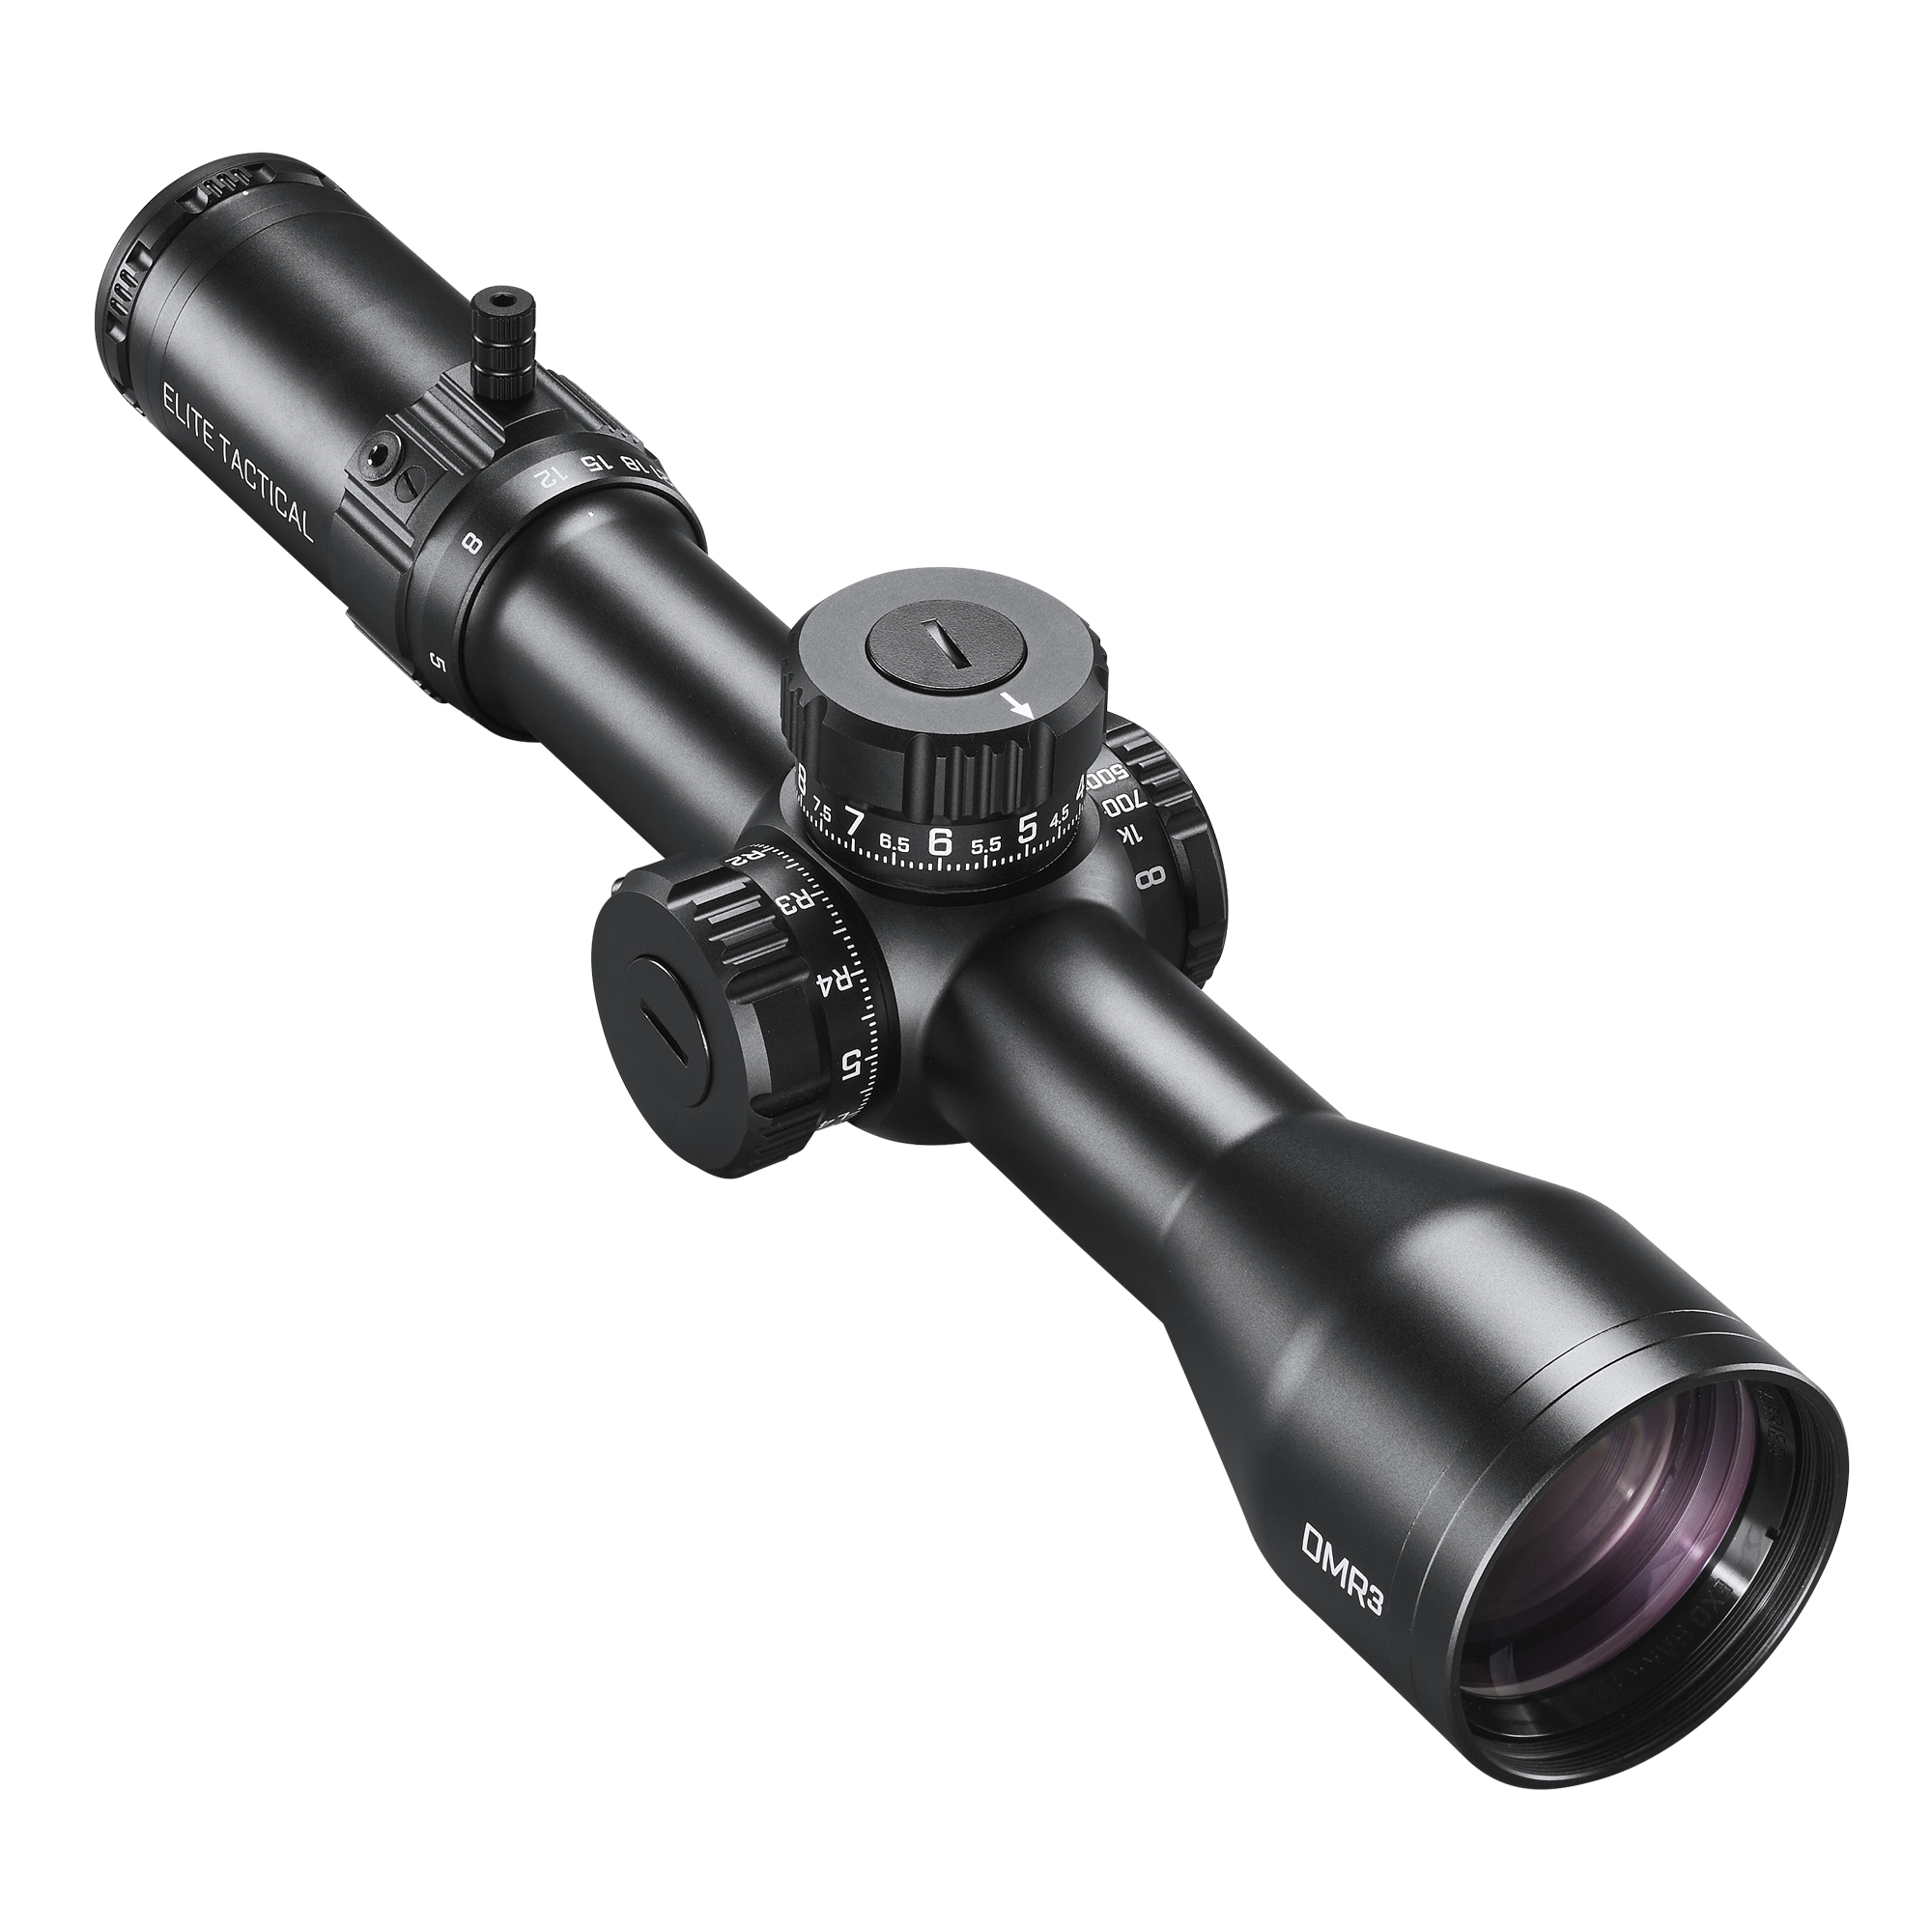 Bushnell Elite Tactical ERS 3.5-21x50 Riflescope G2 Reticle 34mm